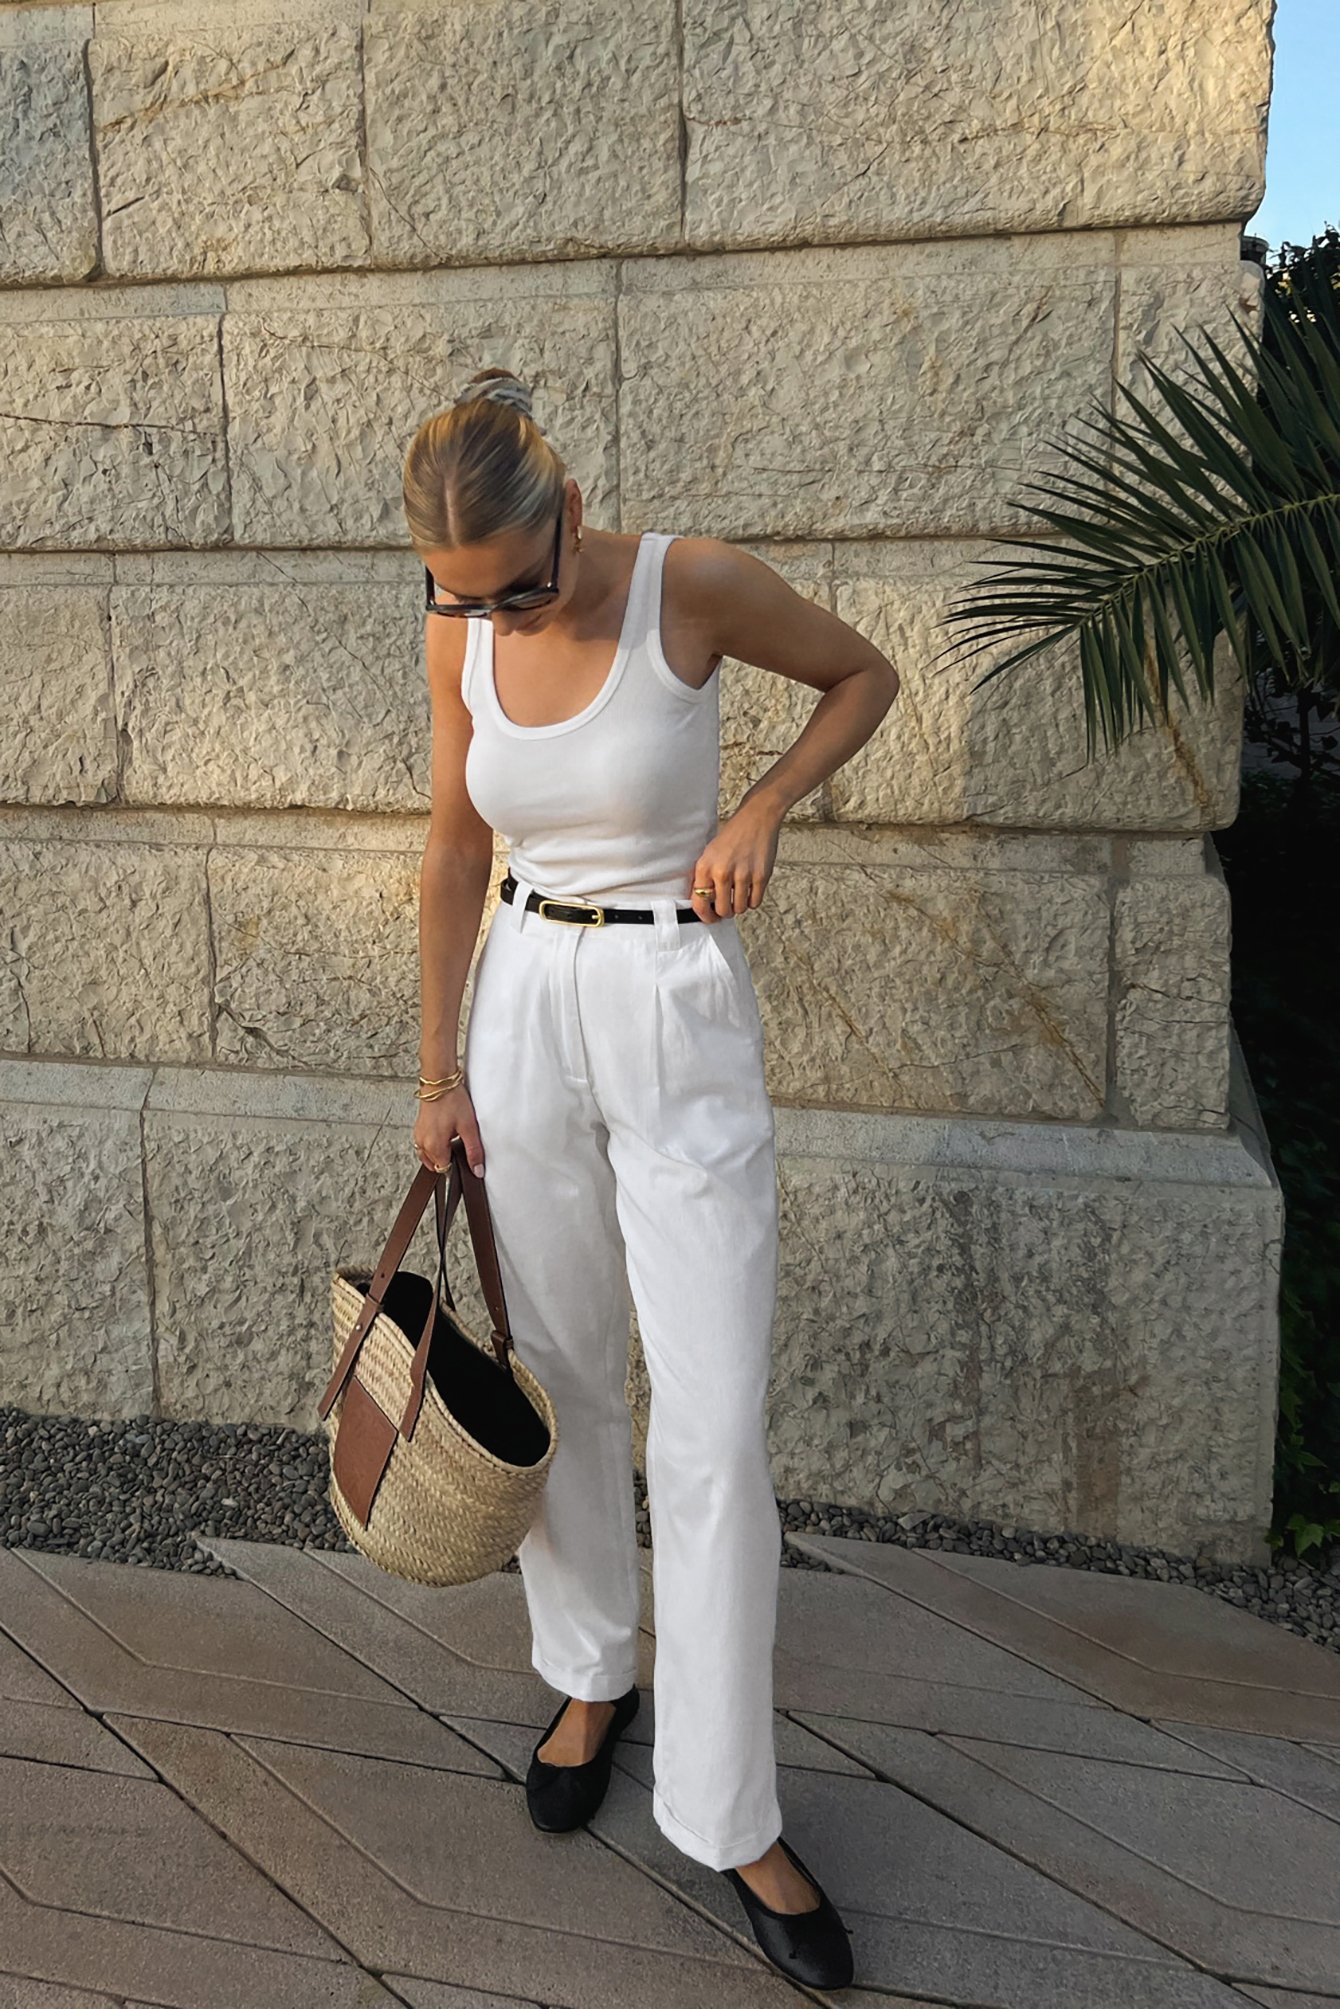 formal trousers for ladies white trousers ladies summer trousers ladies  ladies summer trousers la  Women trousers design Womens pants design  Pants women fashion